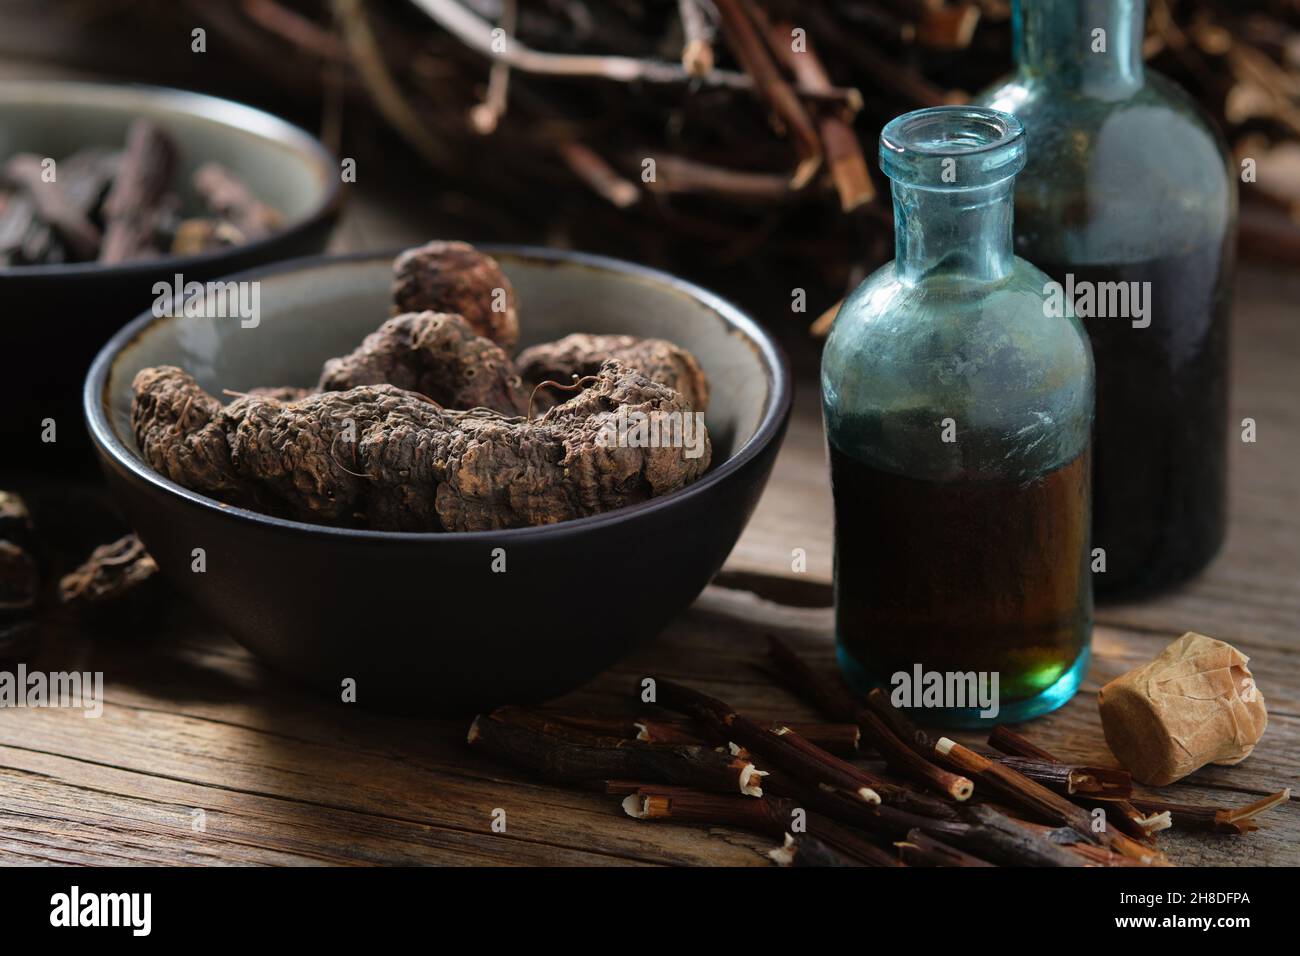 Bottles of infusion or tincture of Persicaria bistorta and Common comfrey roots. Bowl of Bistort, Snakeweed, Snake roots. Dried comfrey officinalis ro Stock Photo